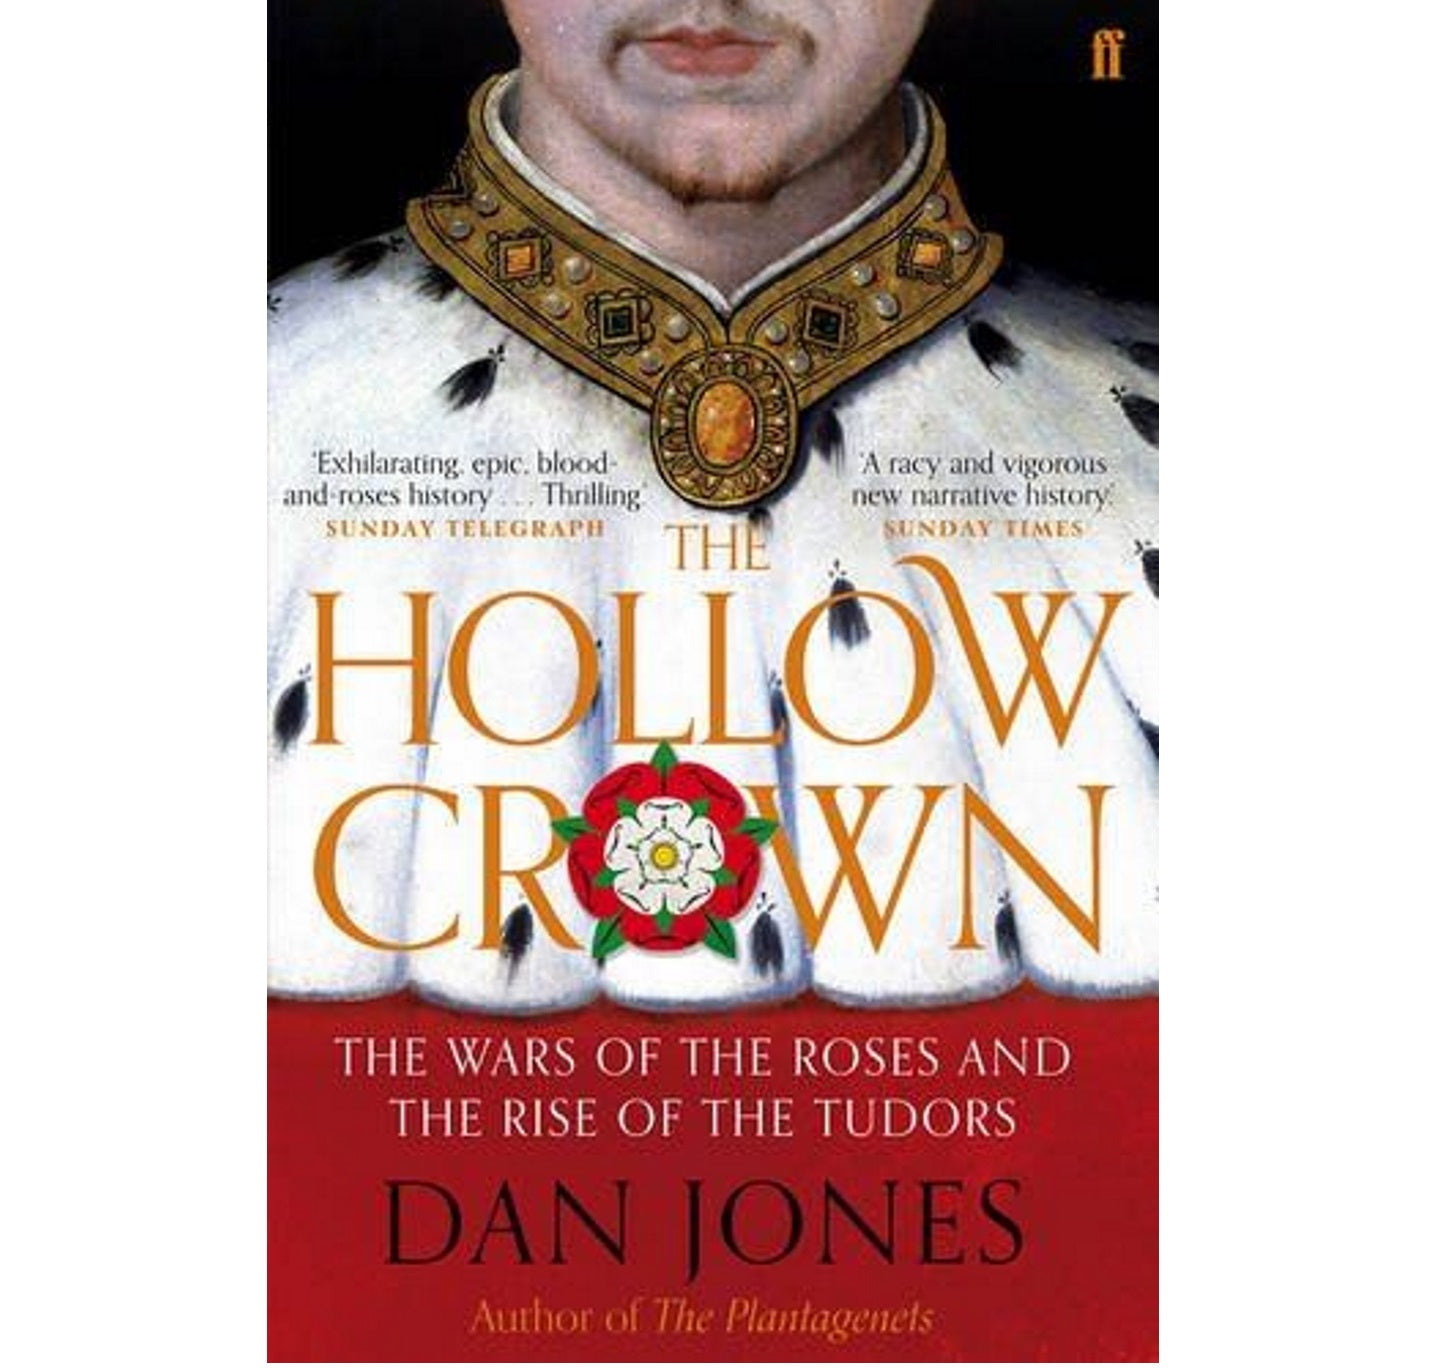 RSC　Rise　the　The　Crown:　Wars　Hollow　and　of　PB　of　The　the　The　Roses　the　–　Tudors　shop